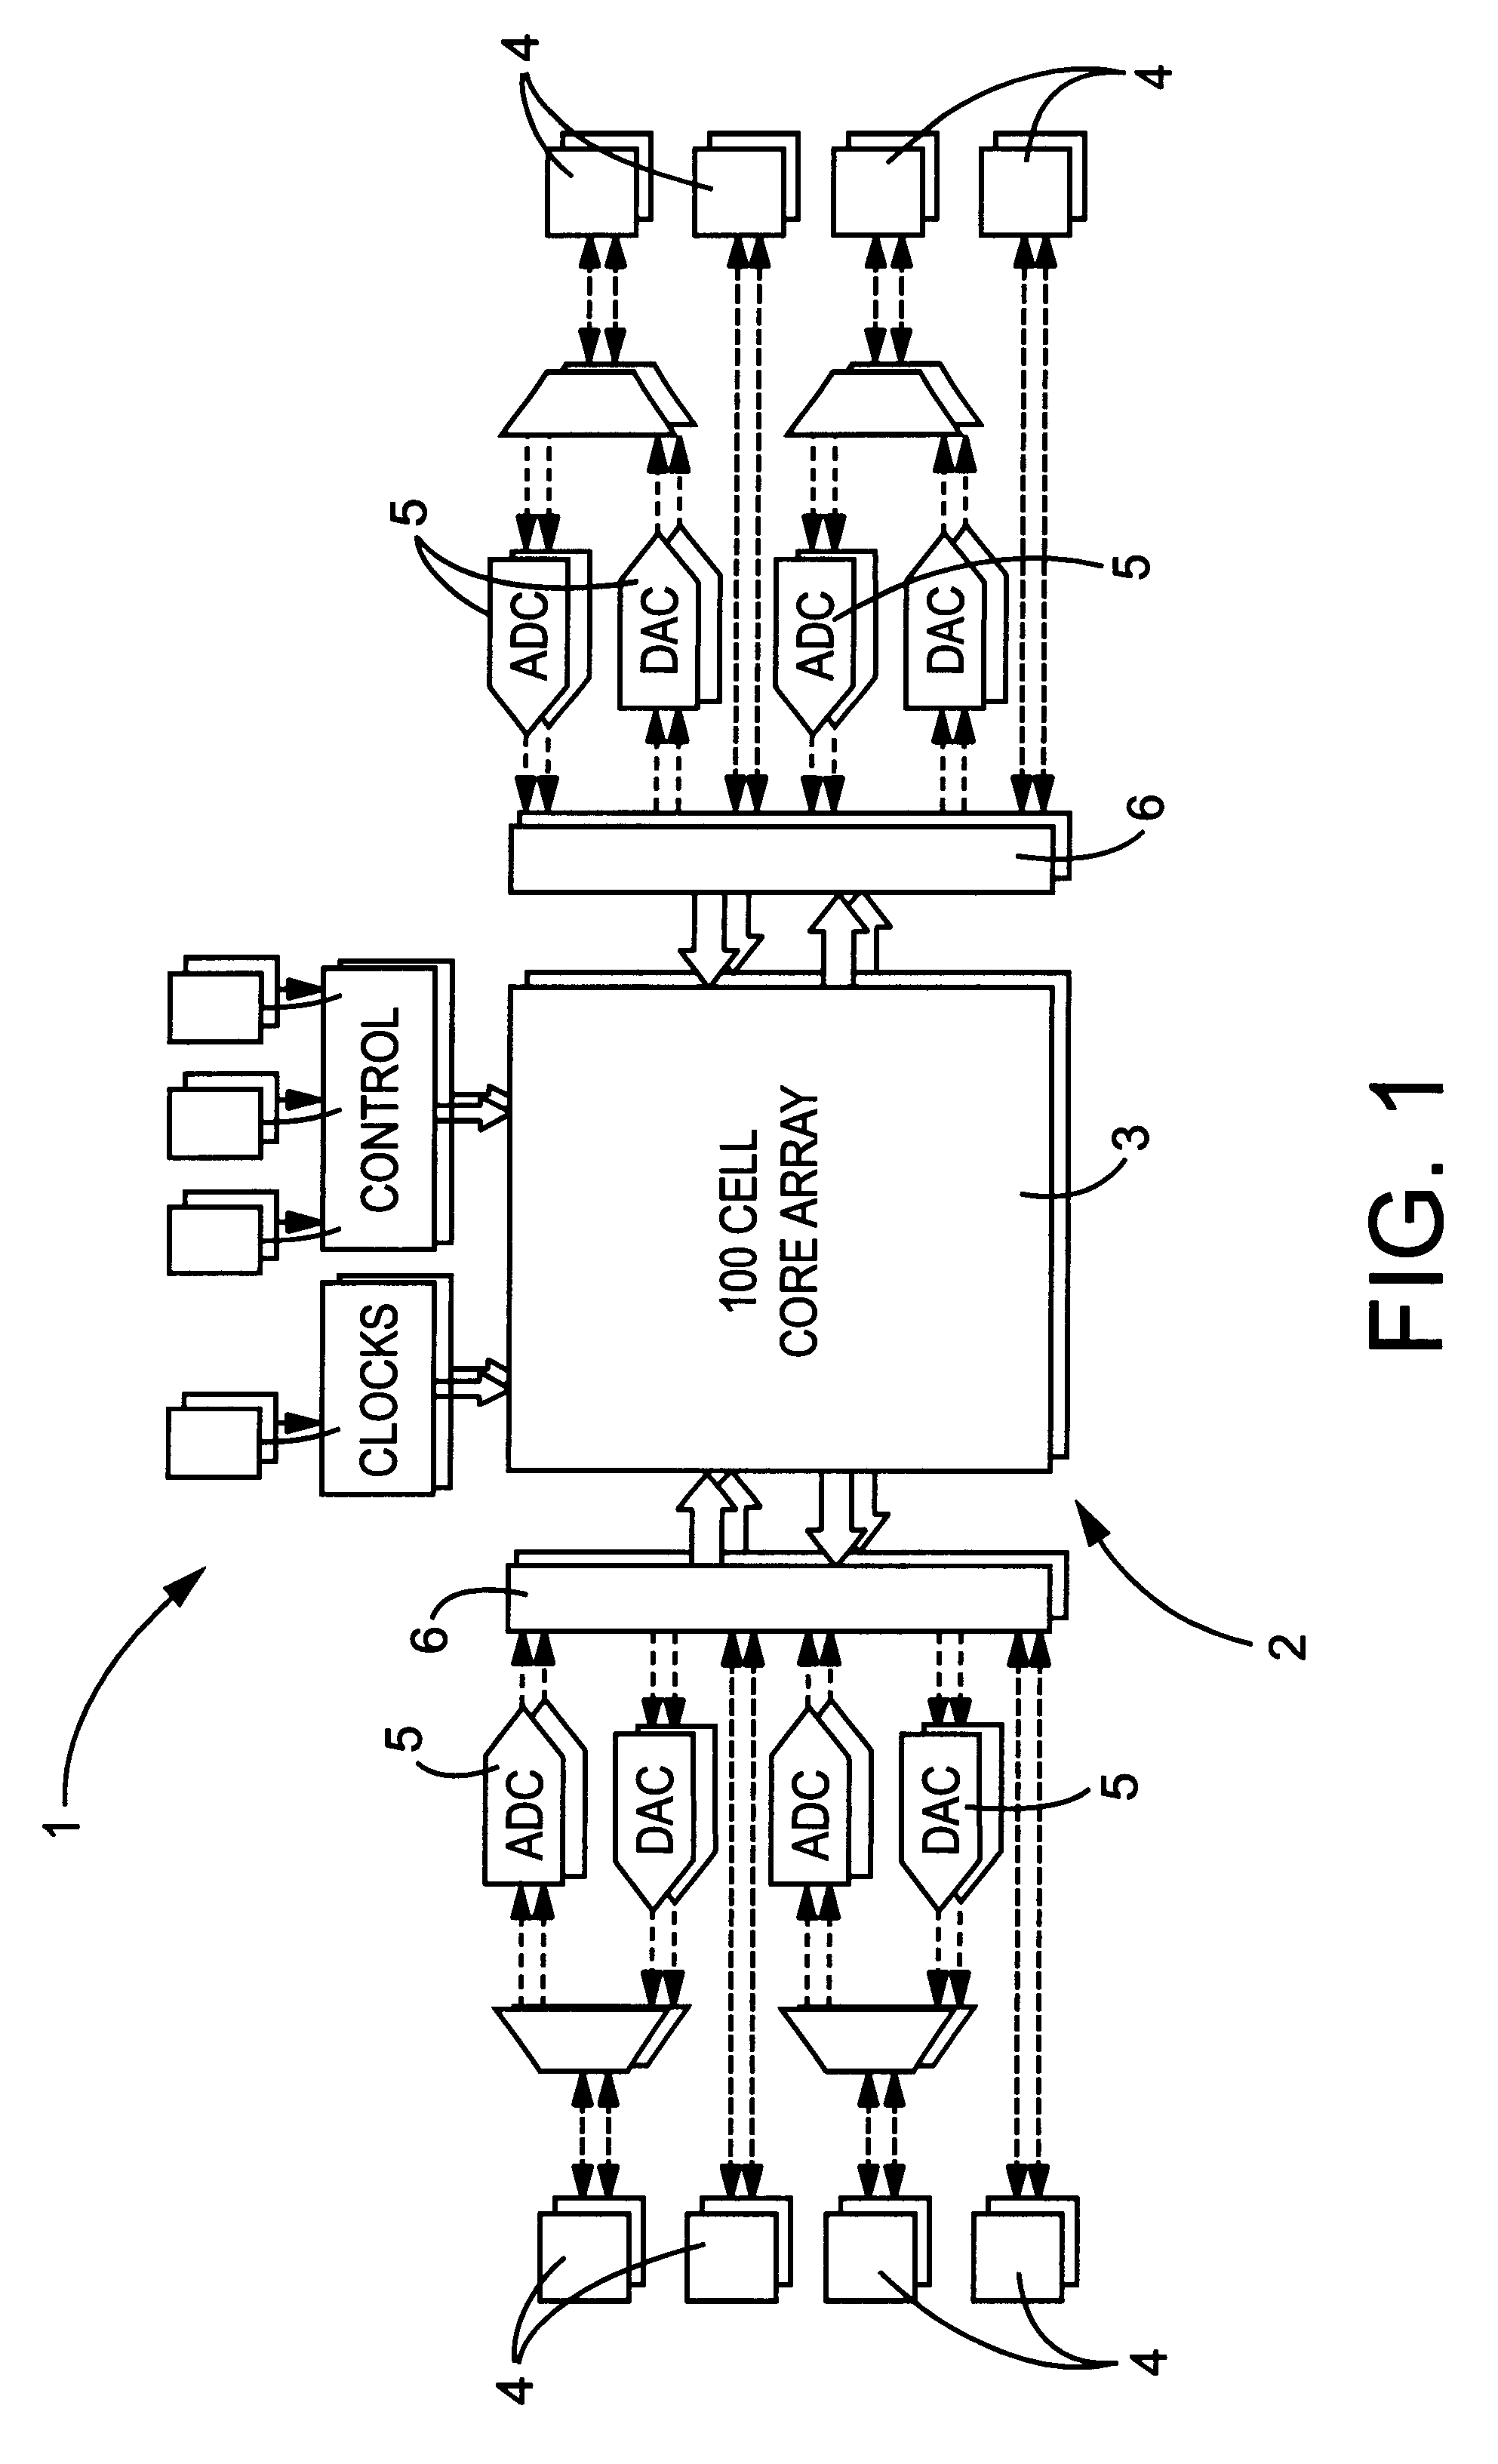 Field programmable processor using dedicated arithmetic fixed function processing elements